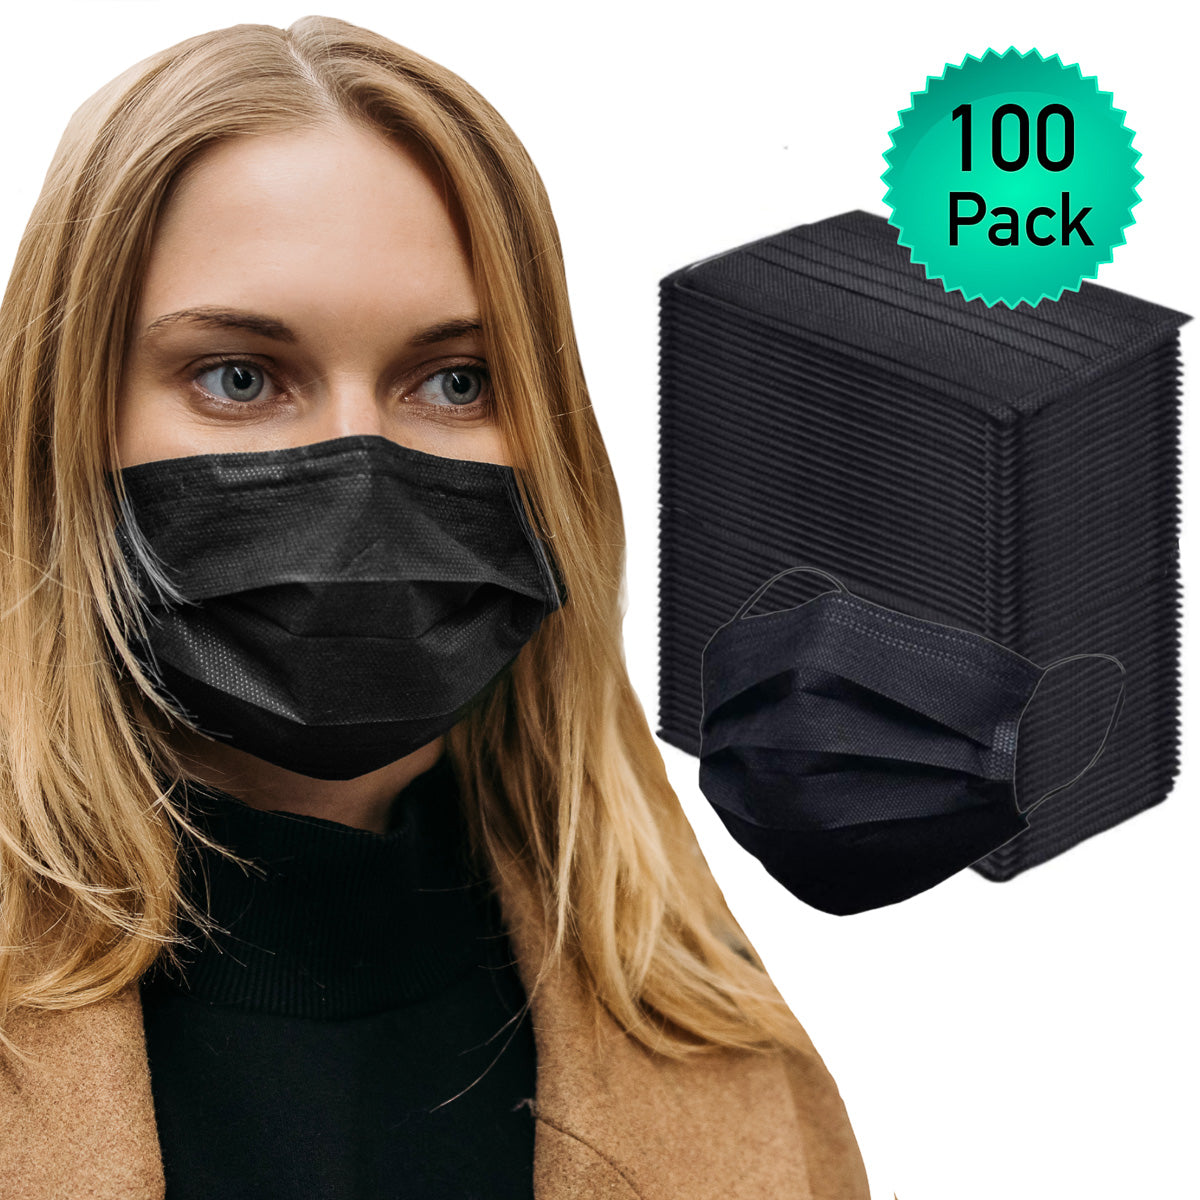 100pk Disposable Face Masks Adult – 3 Layer With Ear Loop, Black